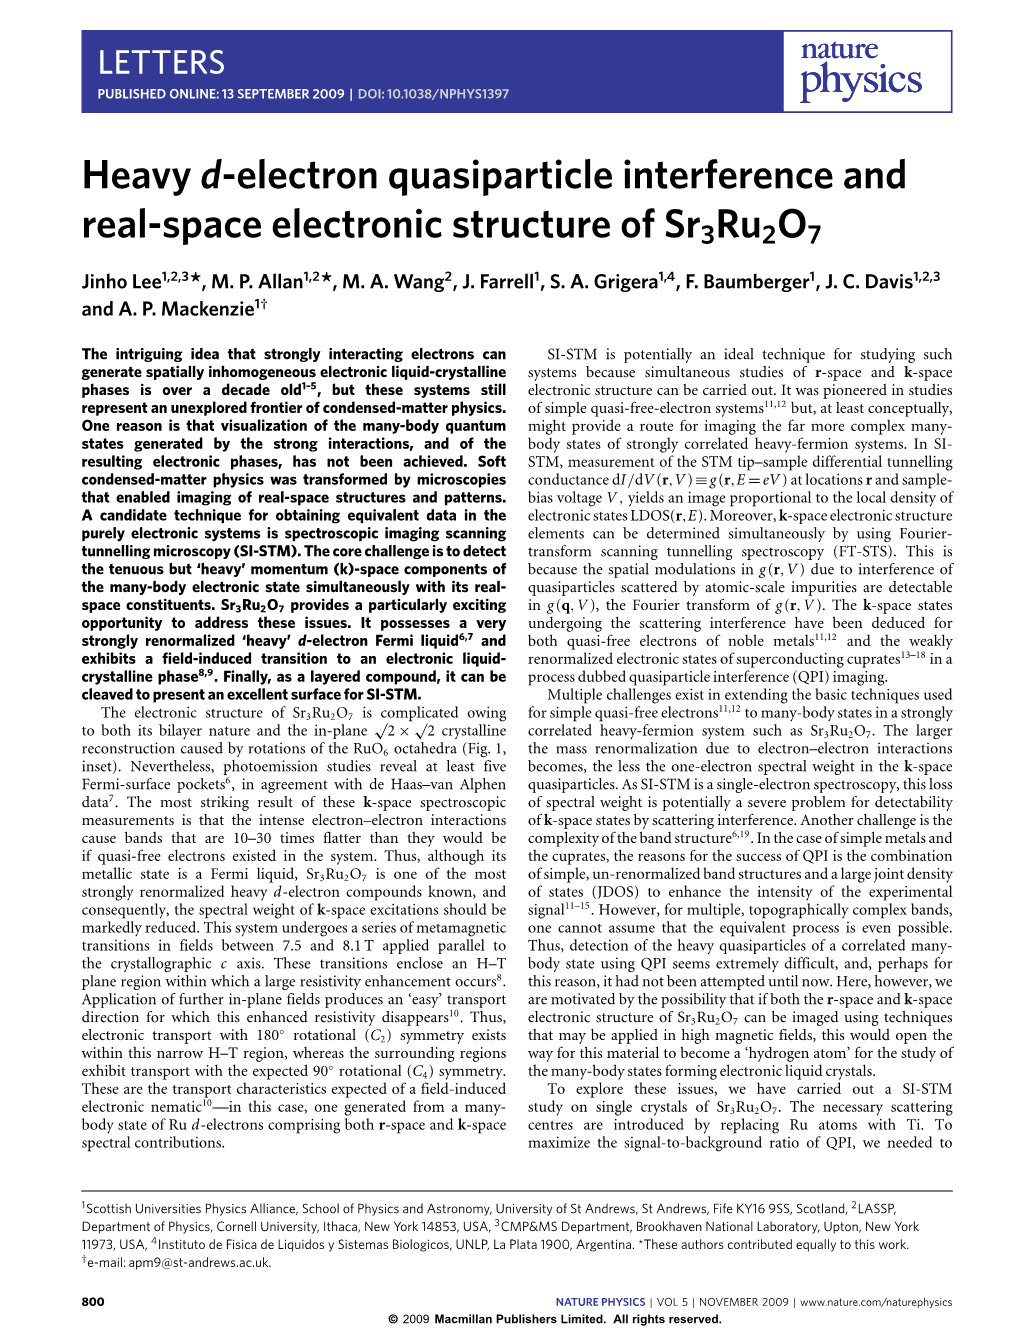 Heavy D-Electron Quasiparticle Interference and Real-Space Electronic Structure of Sr3ru2o7 Jinho Lee1,2,3*, M